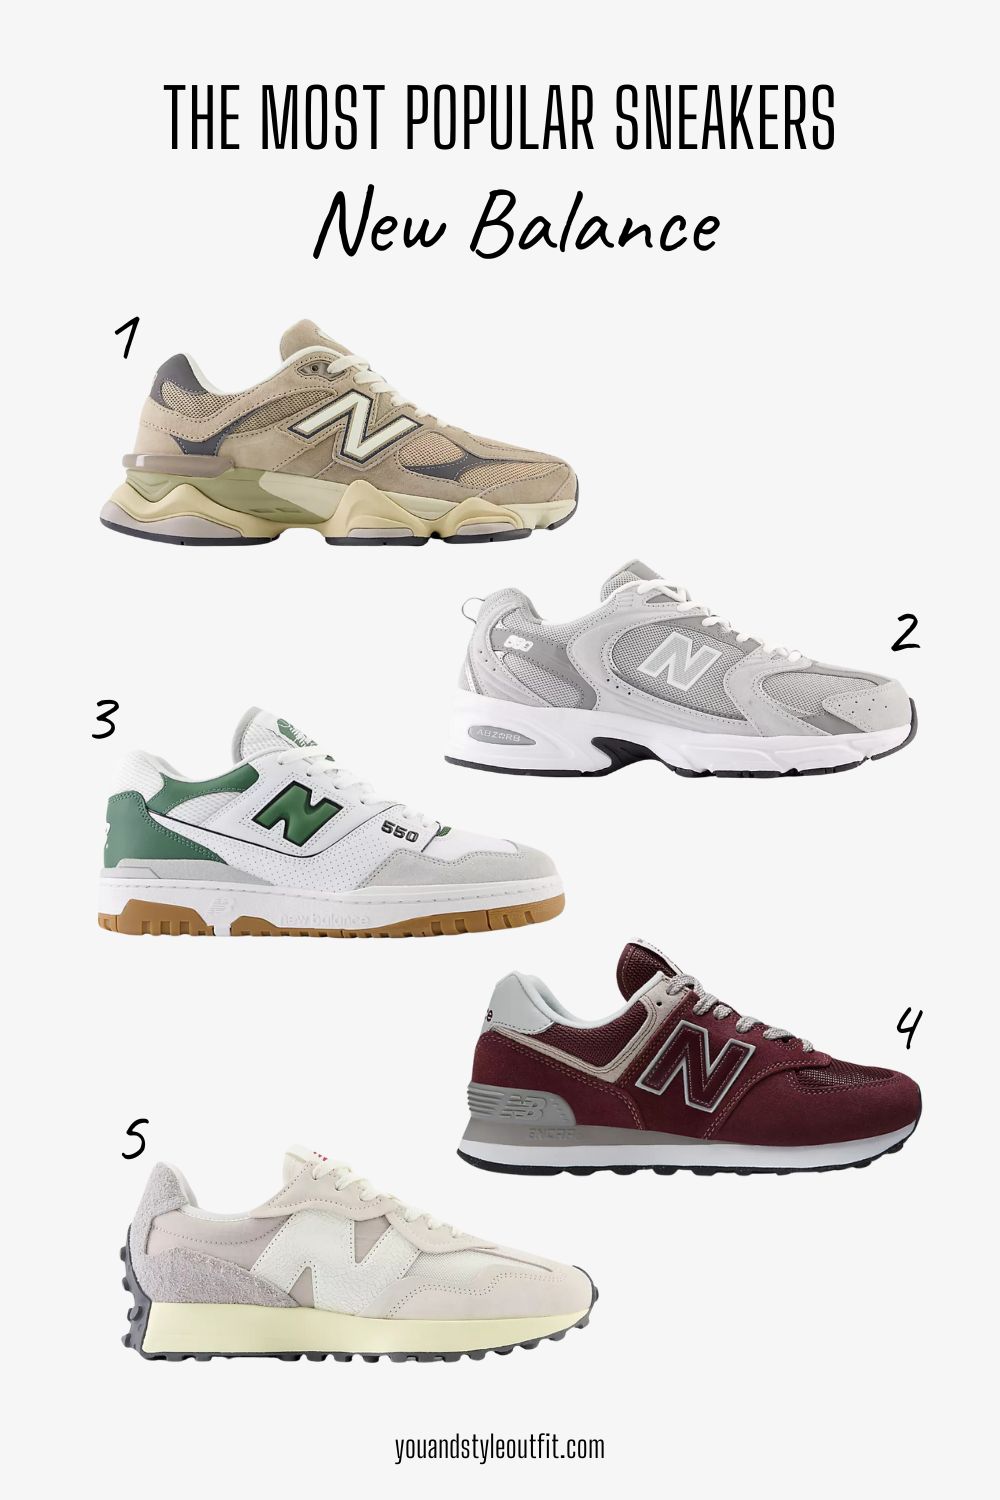 The most popular sneakers New Balance